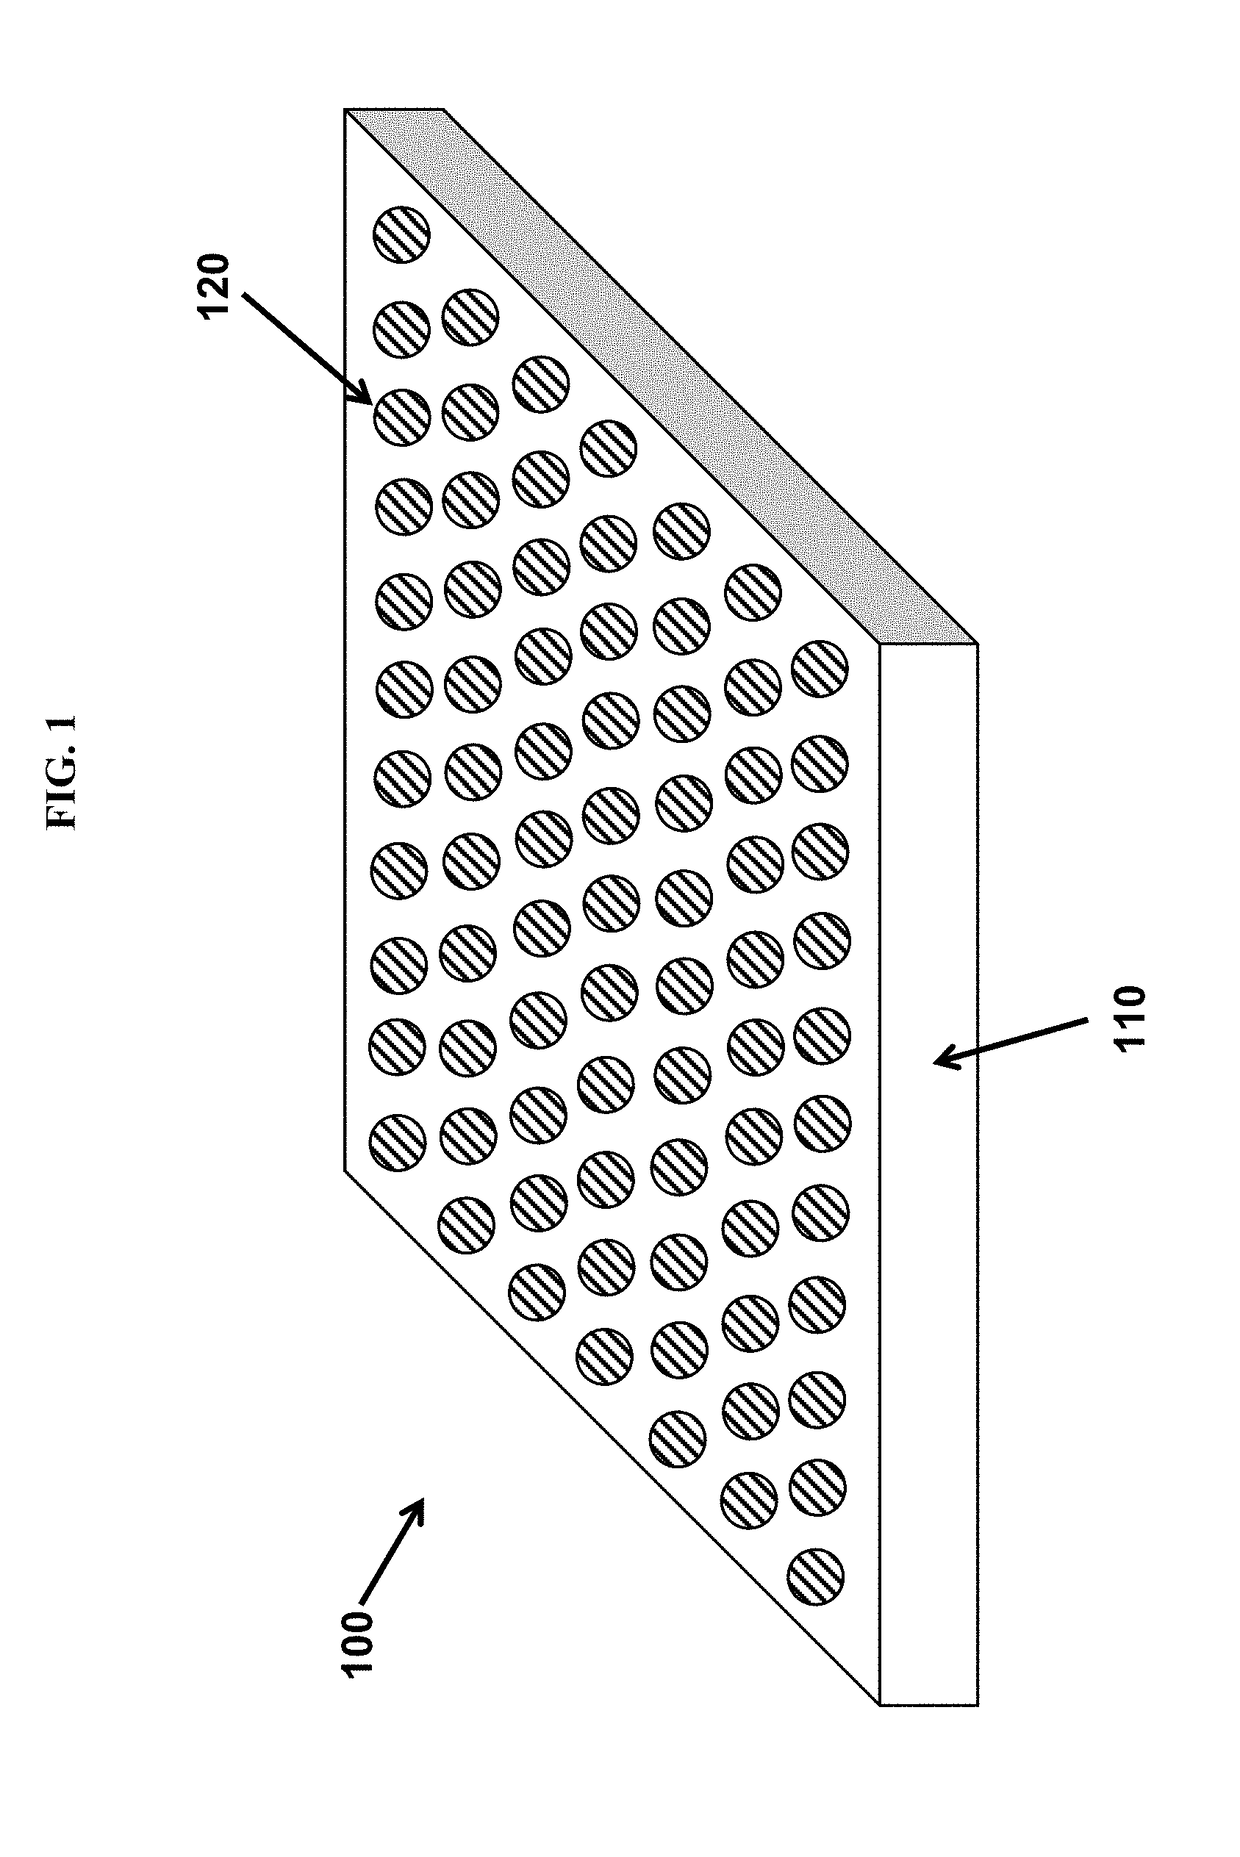 Compositions and methods for fabricating durable, low-ice-adhesion coatings